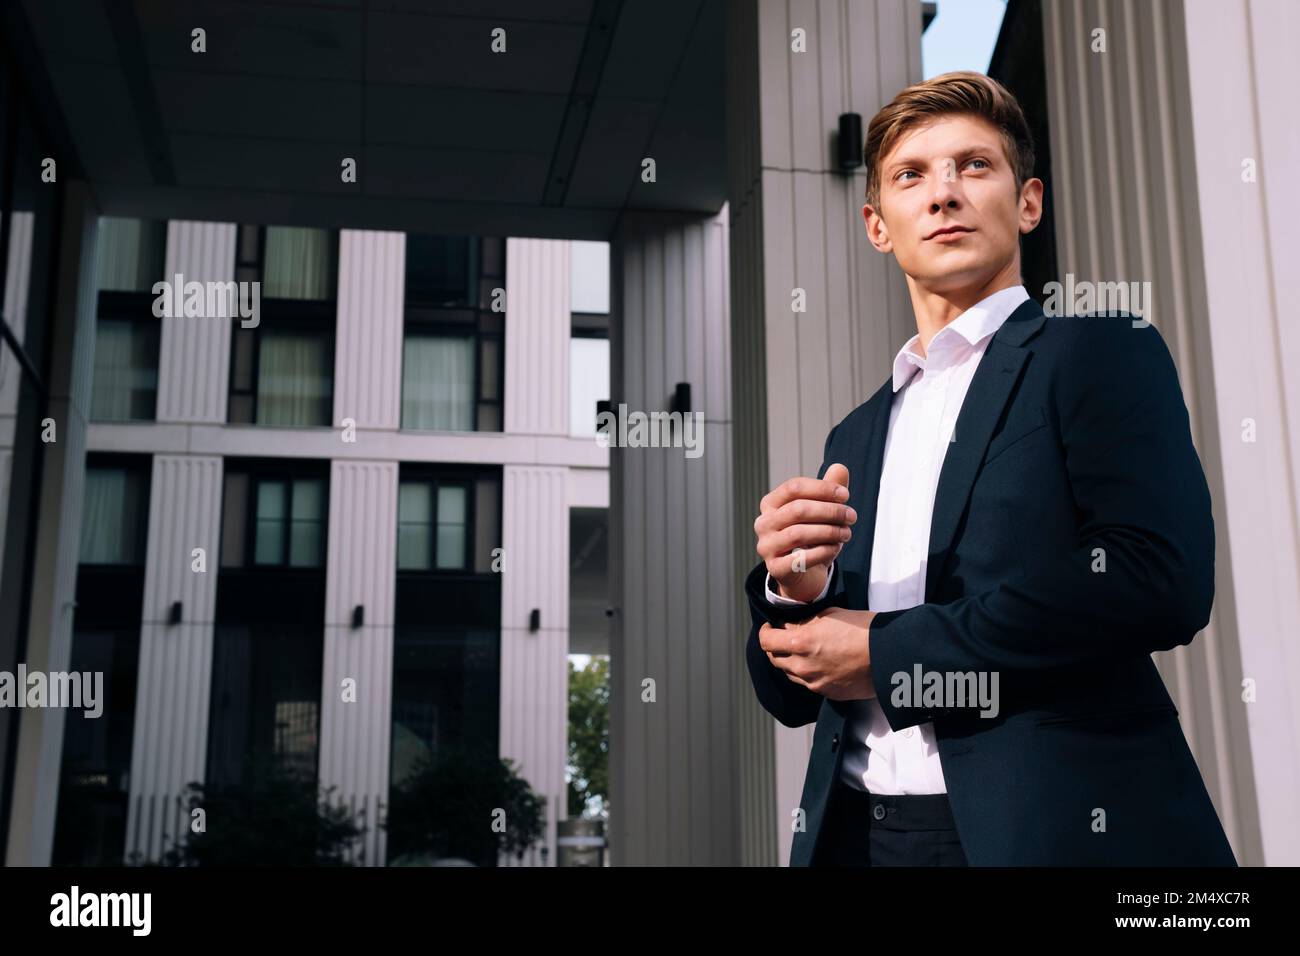 Young businessman adjusting cuff button standing in front of building Stock Photo